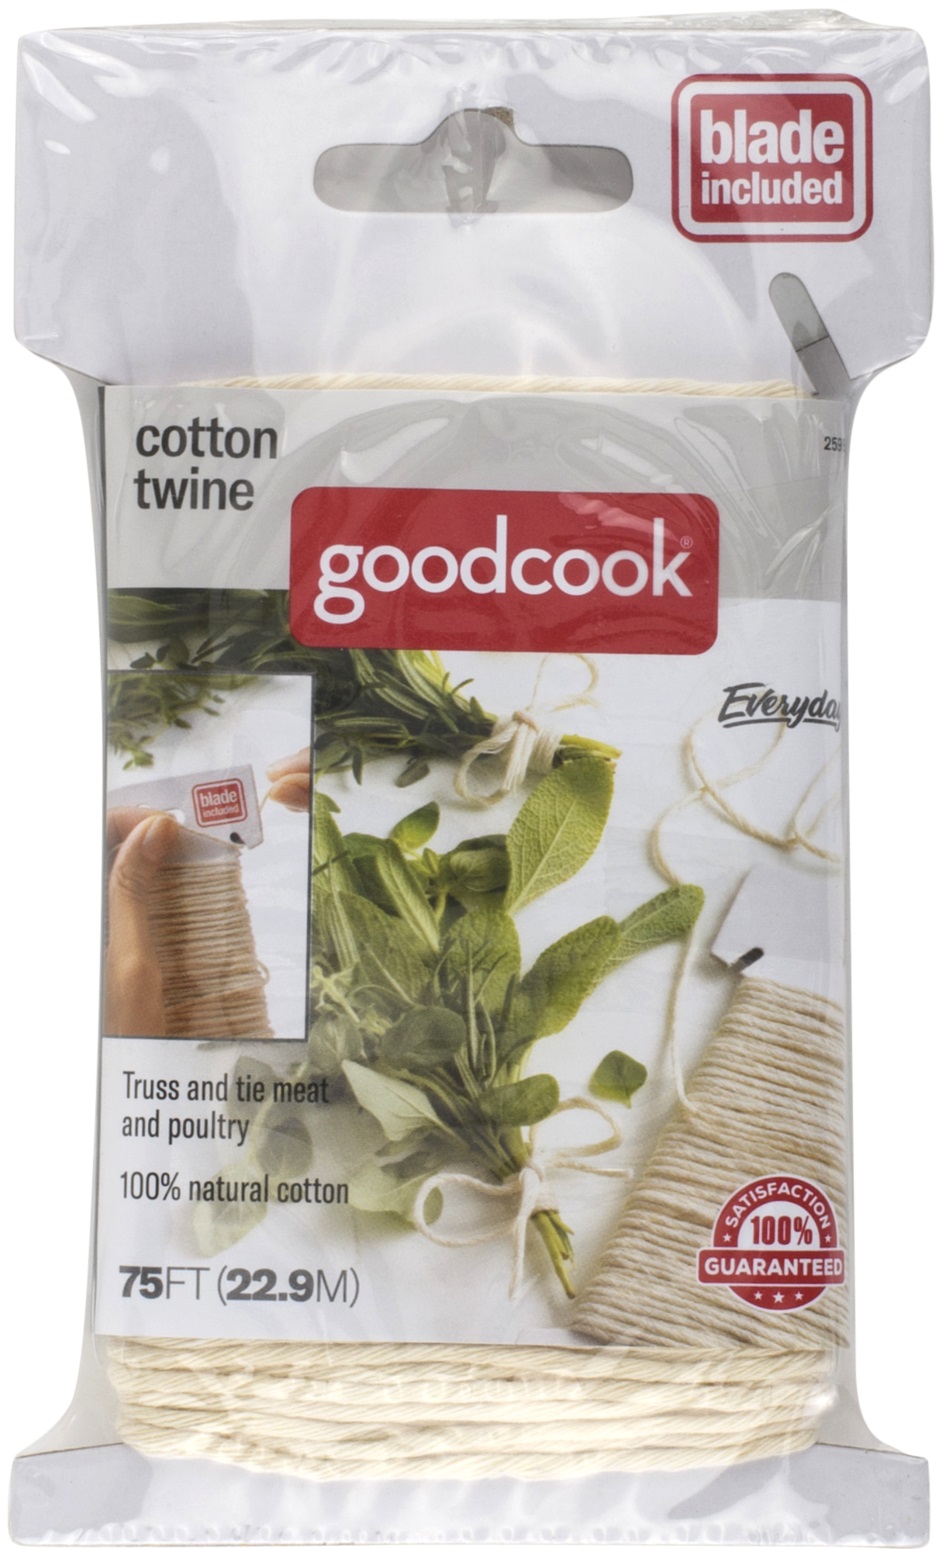 25988_GoodCook_Everyday_Cotton Twine 75 Ft_Packaging 1.psd